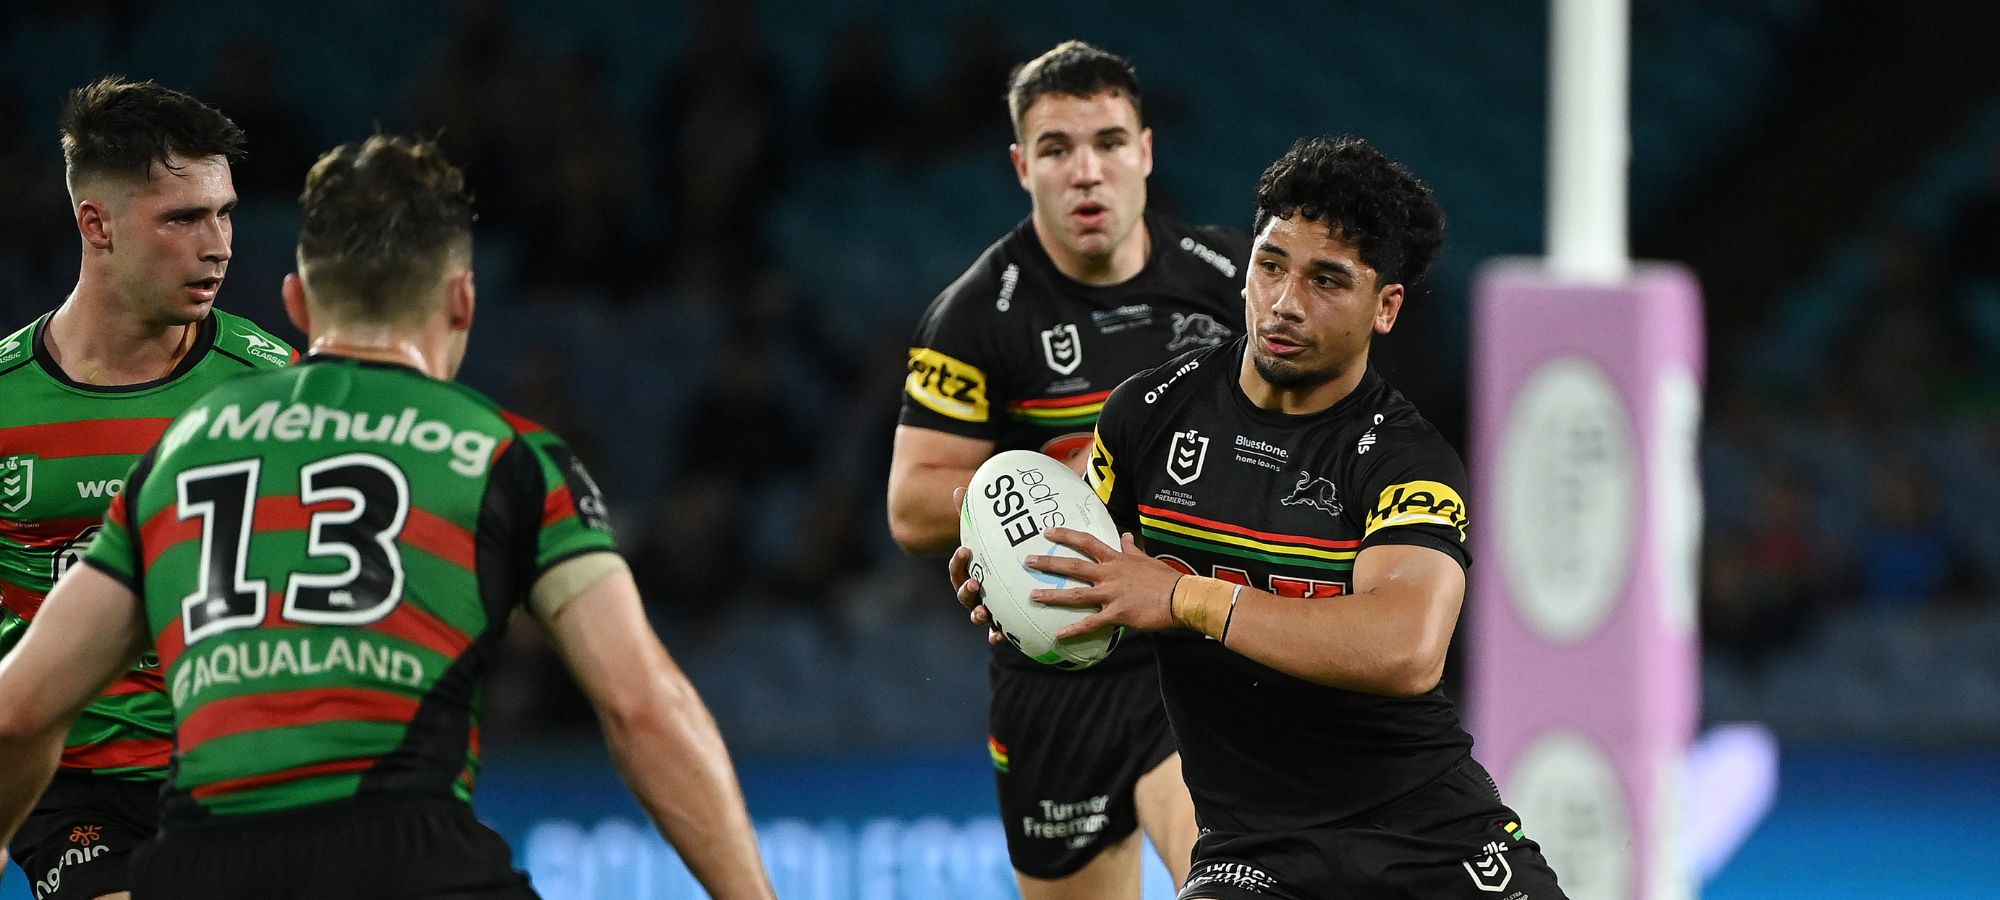 Rabbitohs vs Panthers Live in The Basement